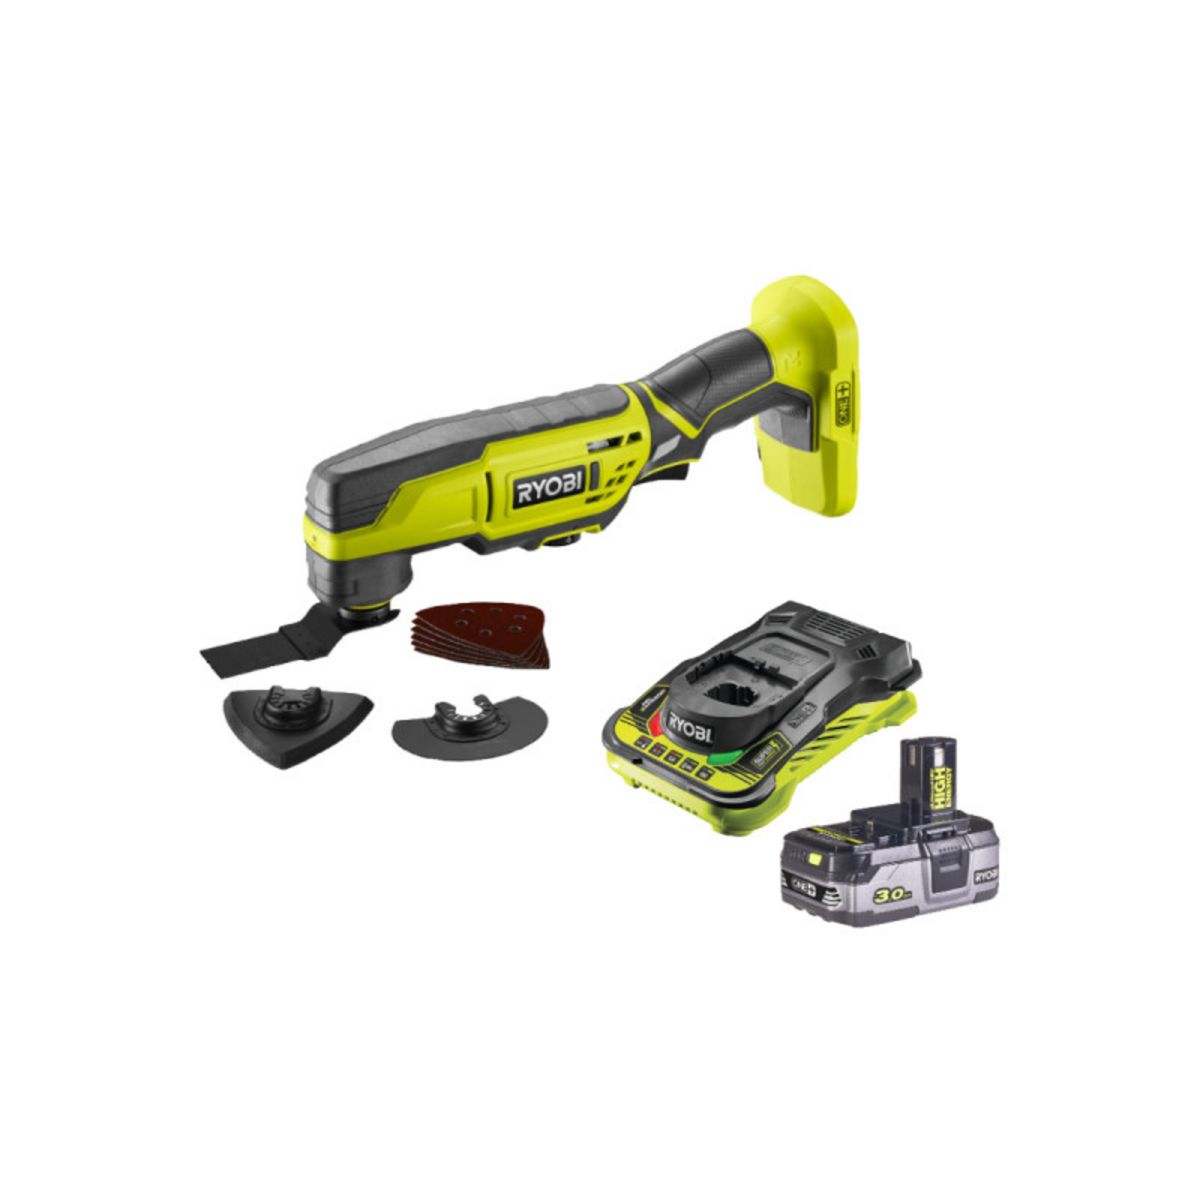 Pack RYOBI Multitool 18V OnePlus R18MT3-0 - 1 Batterie 3.0Ah High Energy - 1 Chargeur ultra rapide pas cher - Auchan.fr